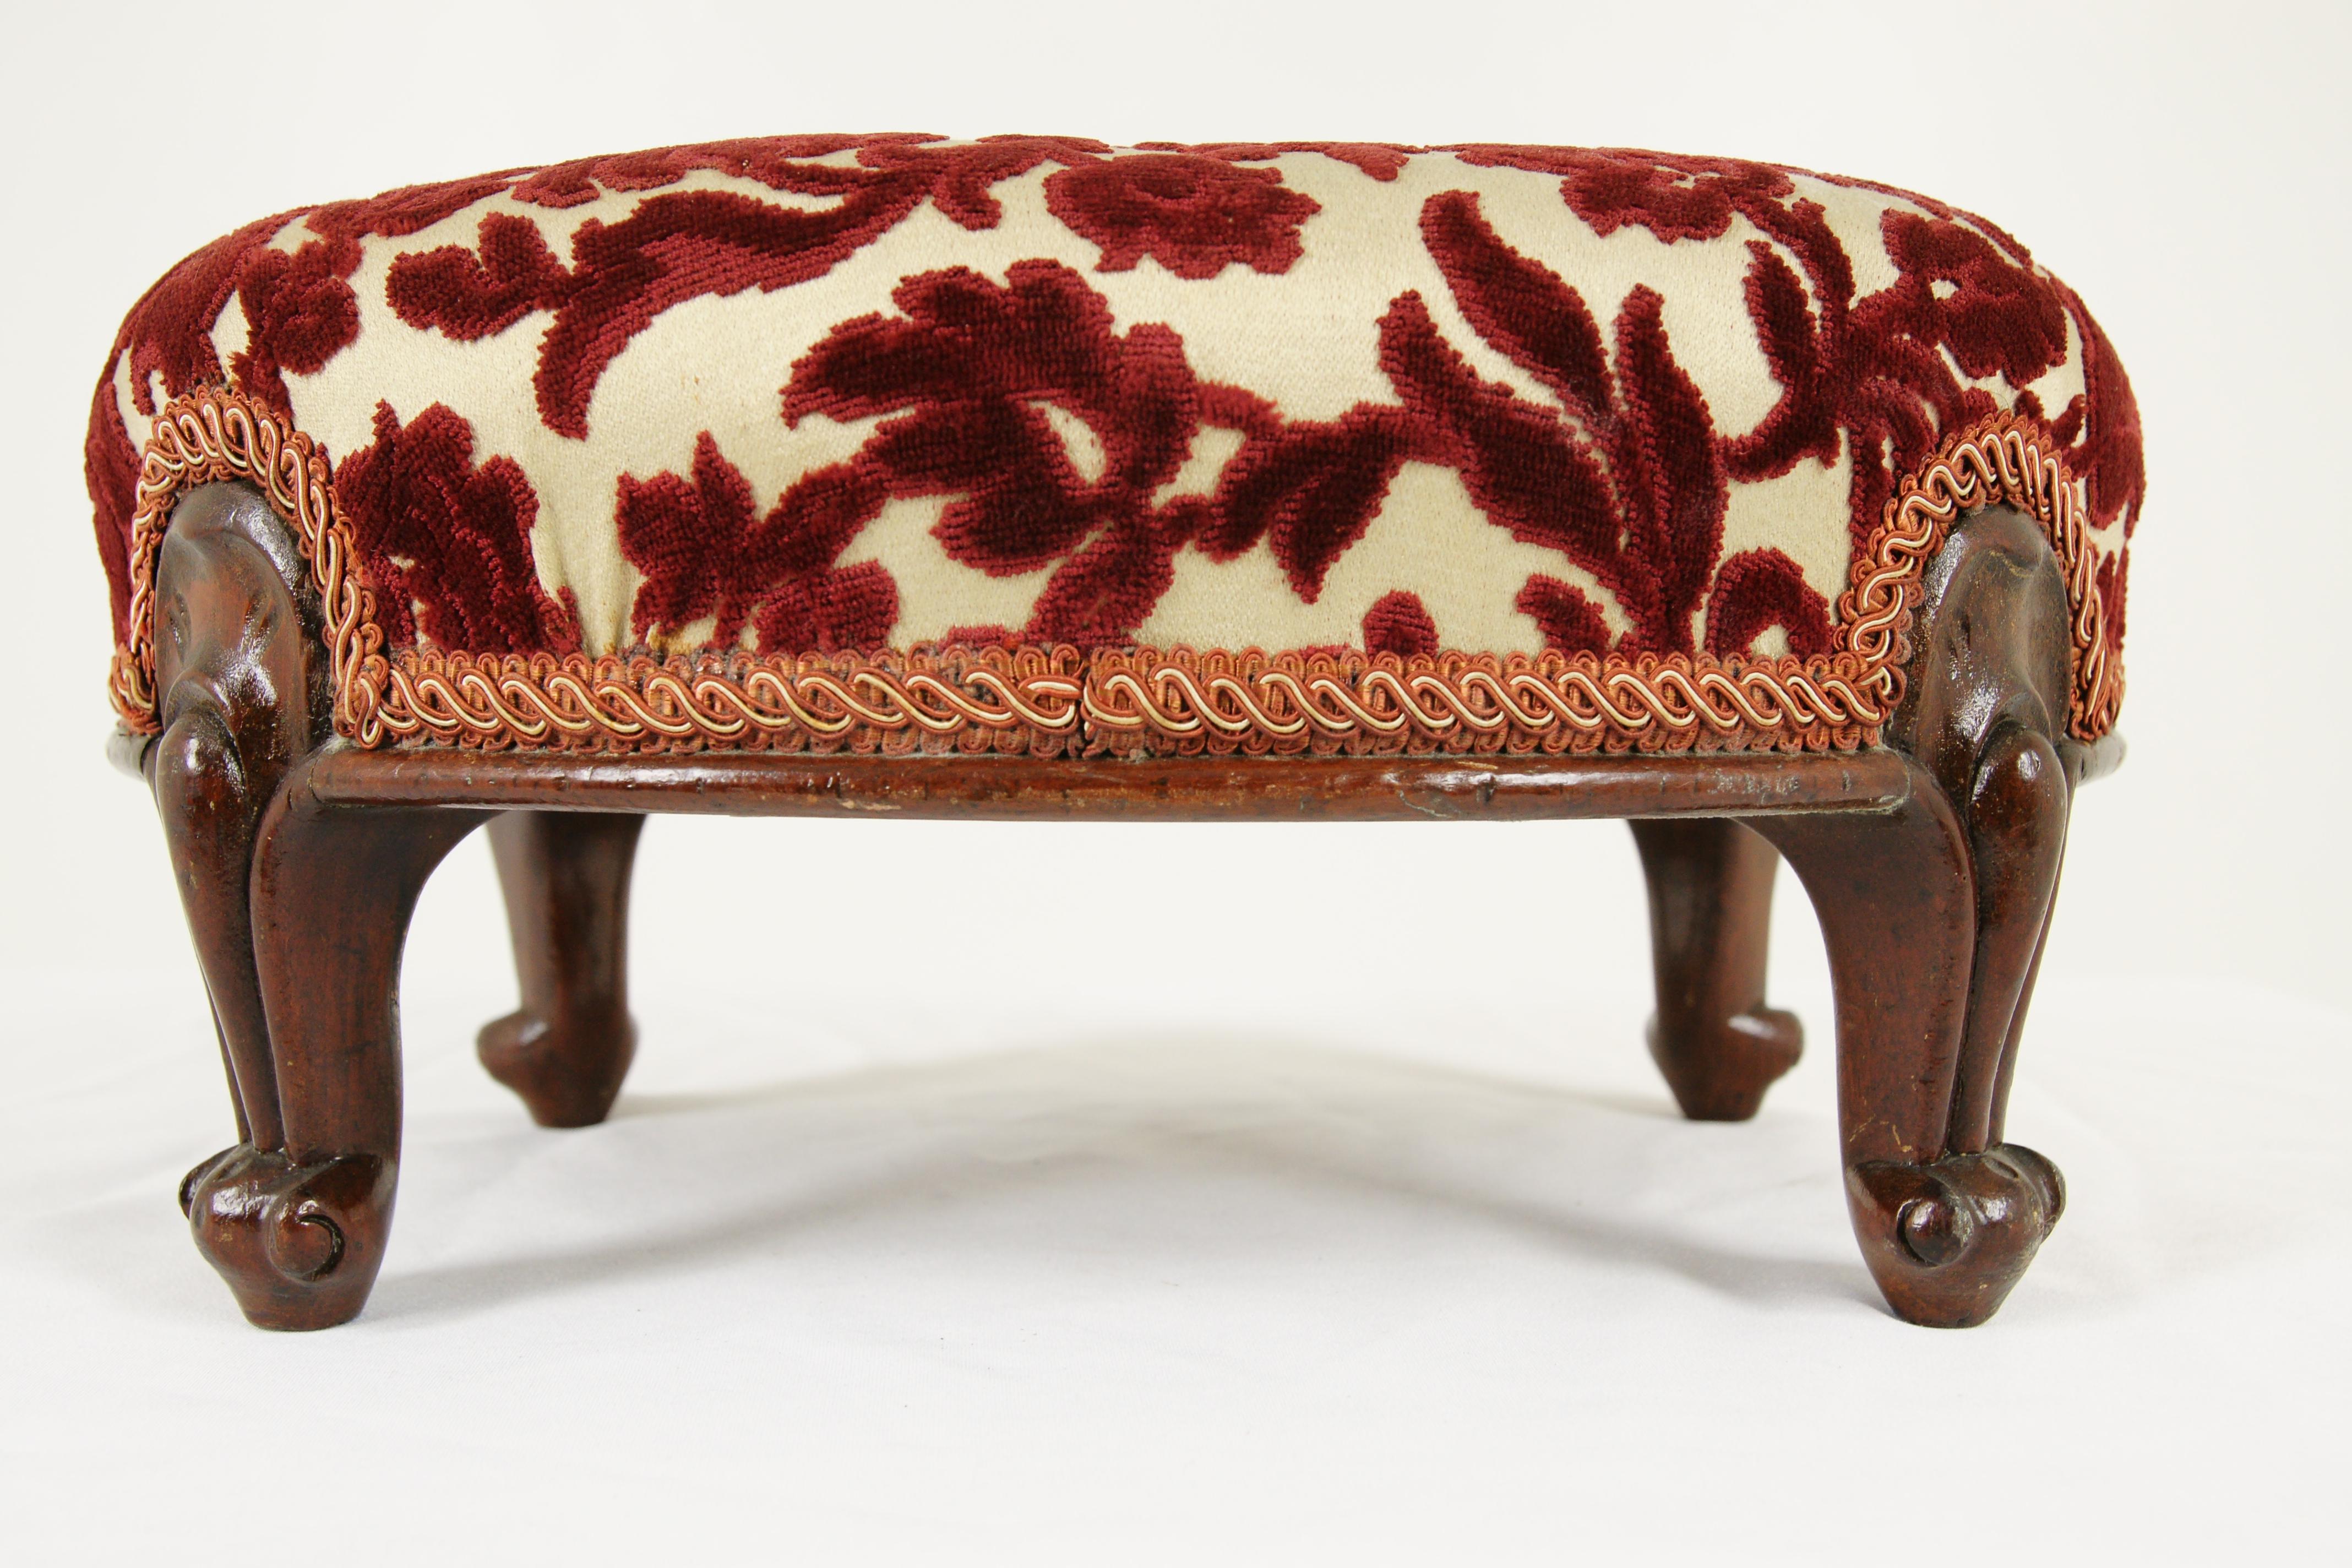 Hand-Crafted Antique Footstool, Carved Walnut Footstool, Victorian, Scotland 1880, B1702